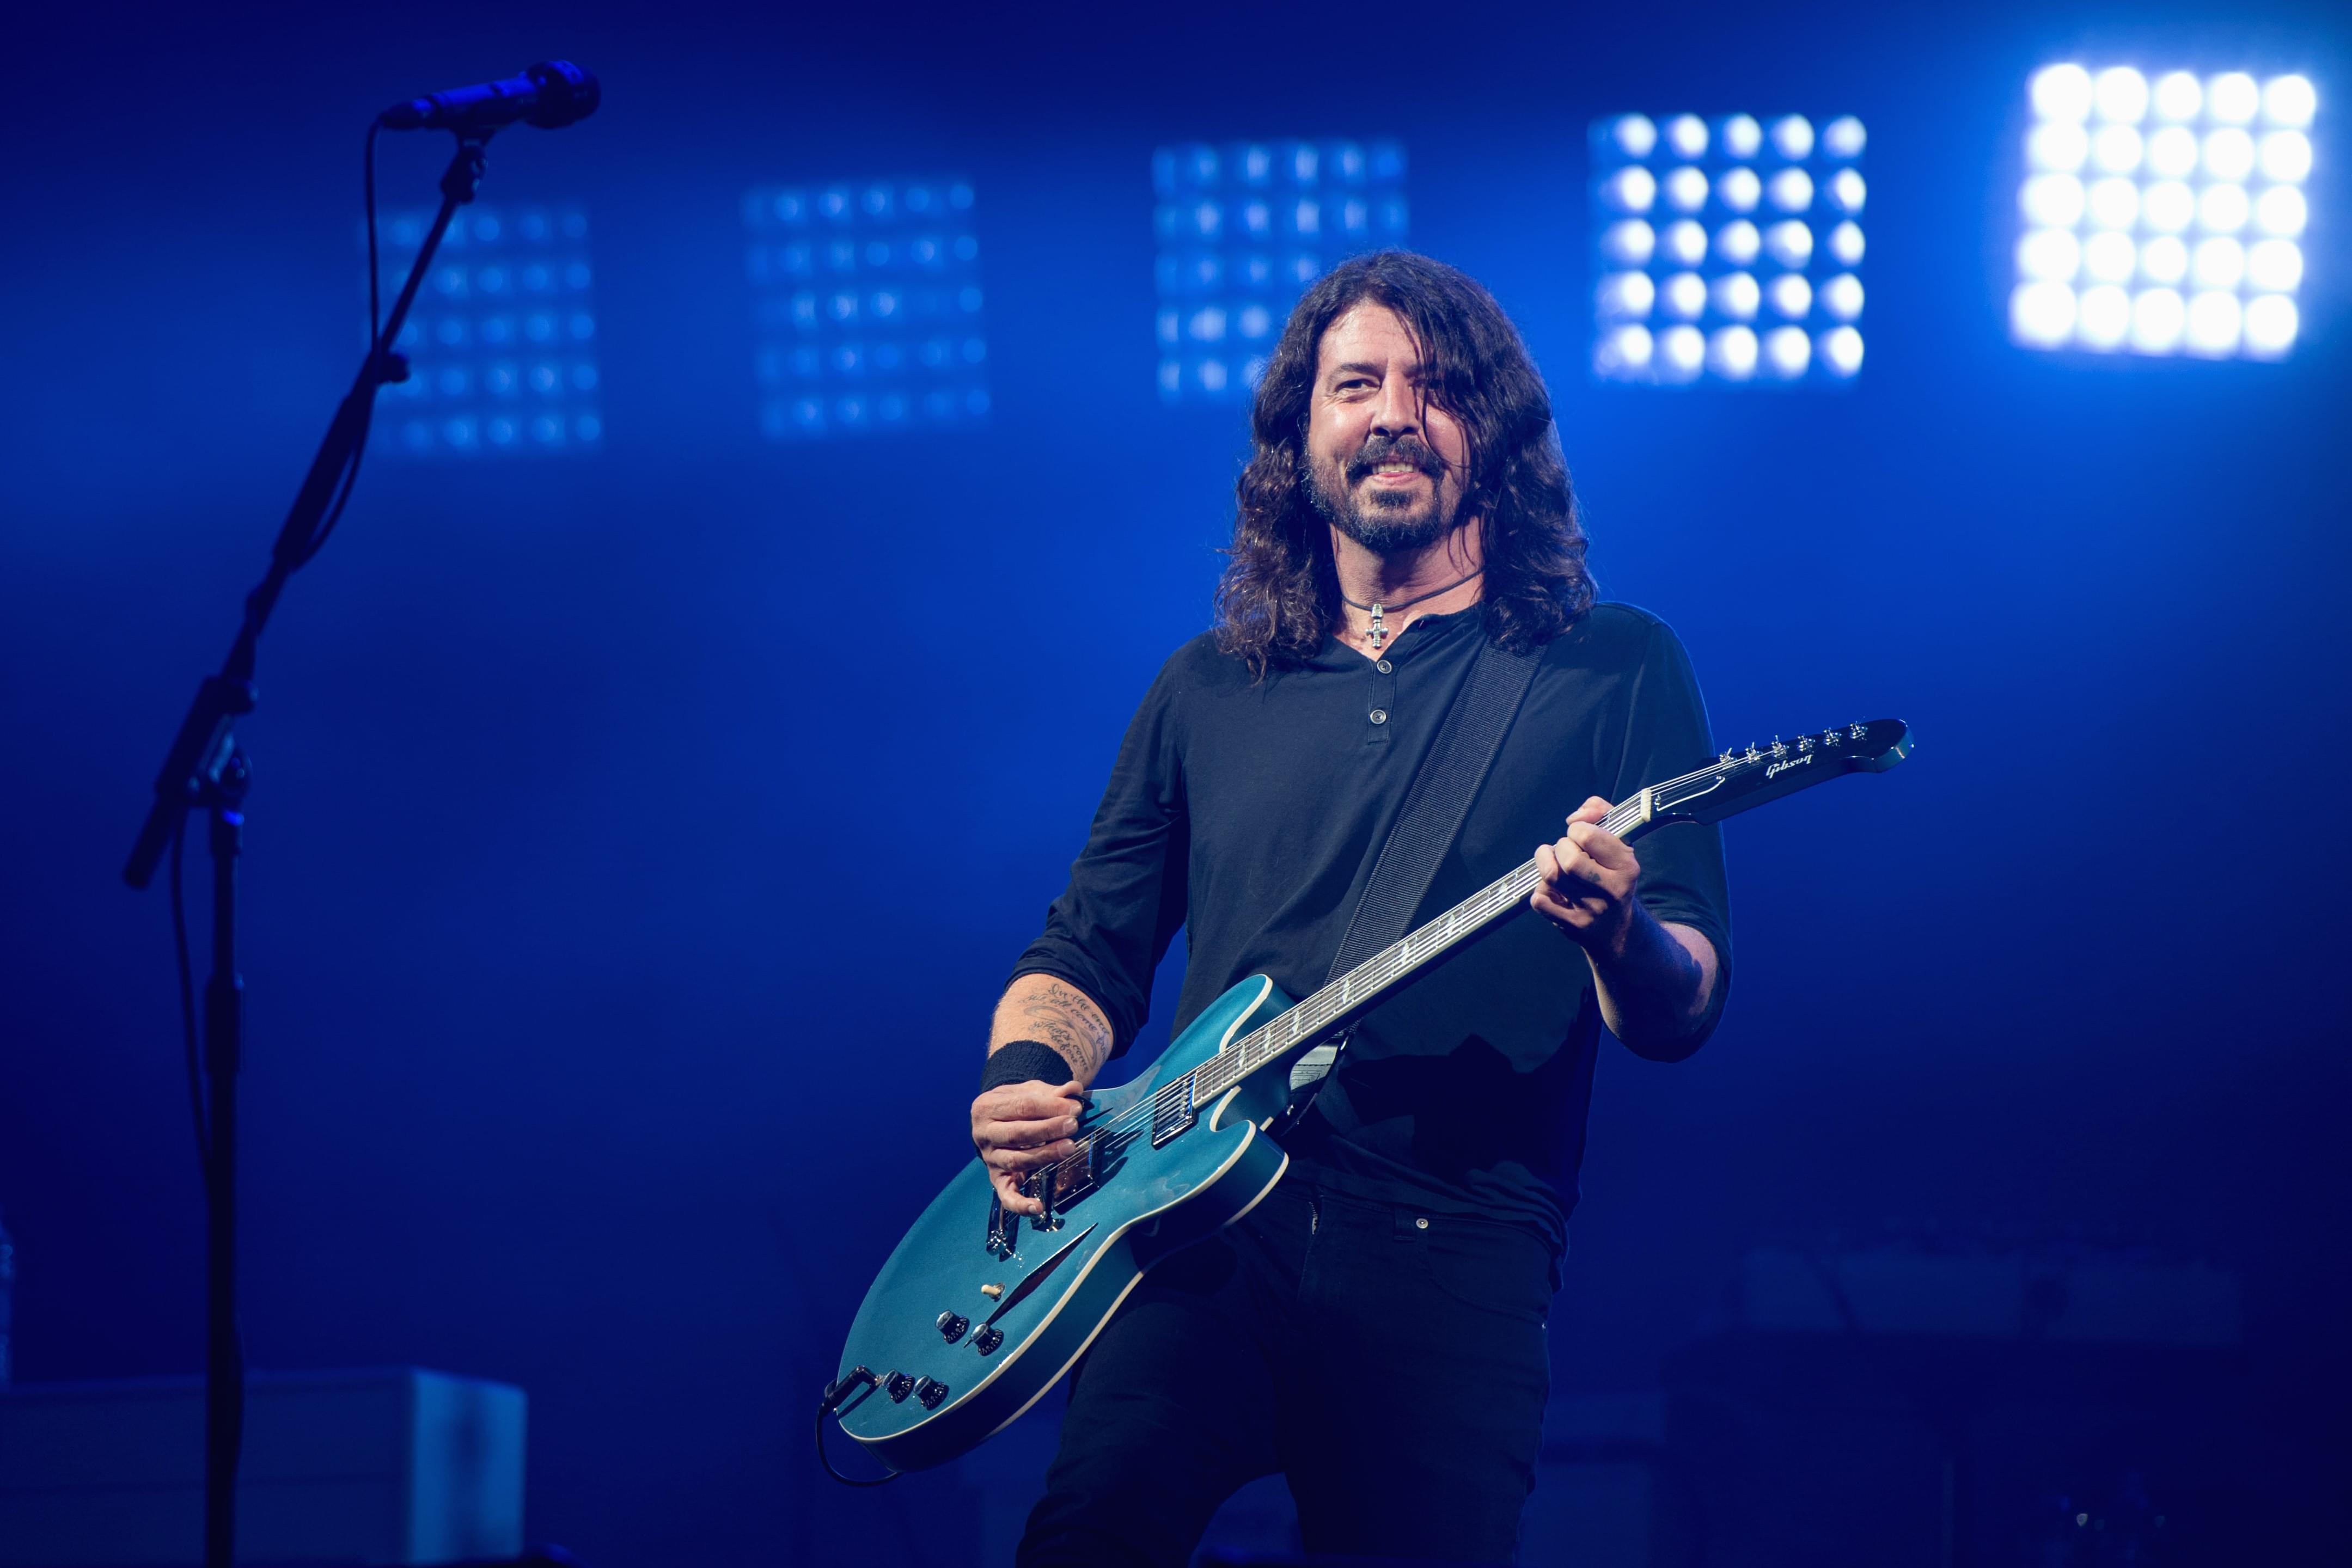 Foo Fighters Continue to Tease New Music on Social Media [AUDIO]